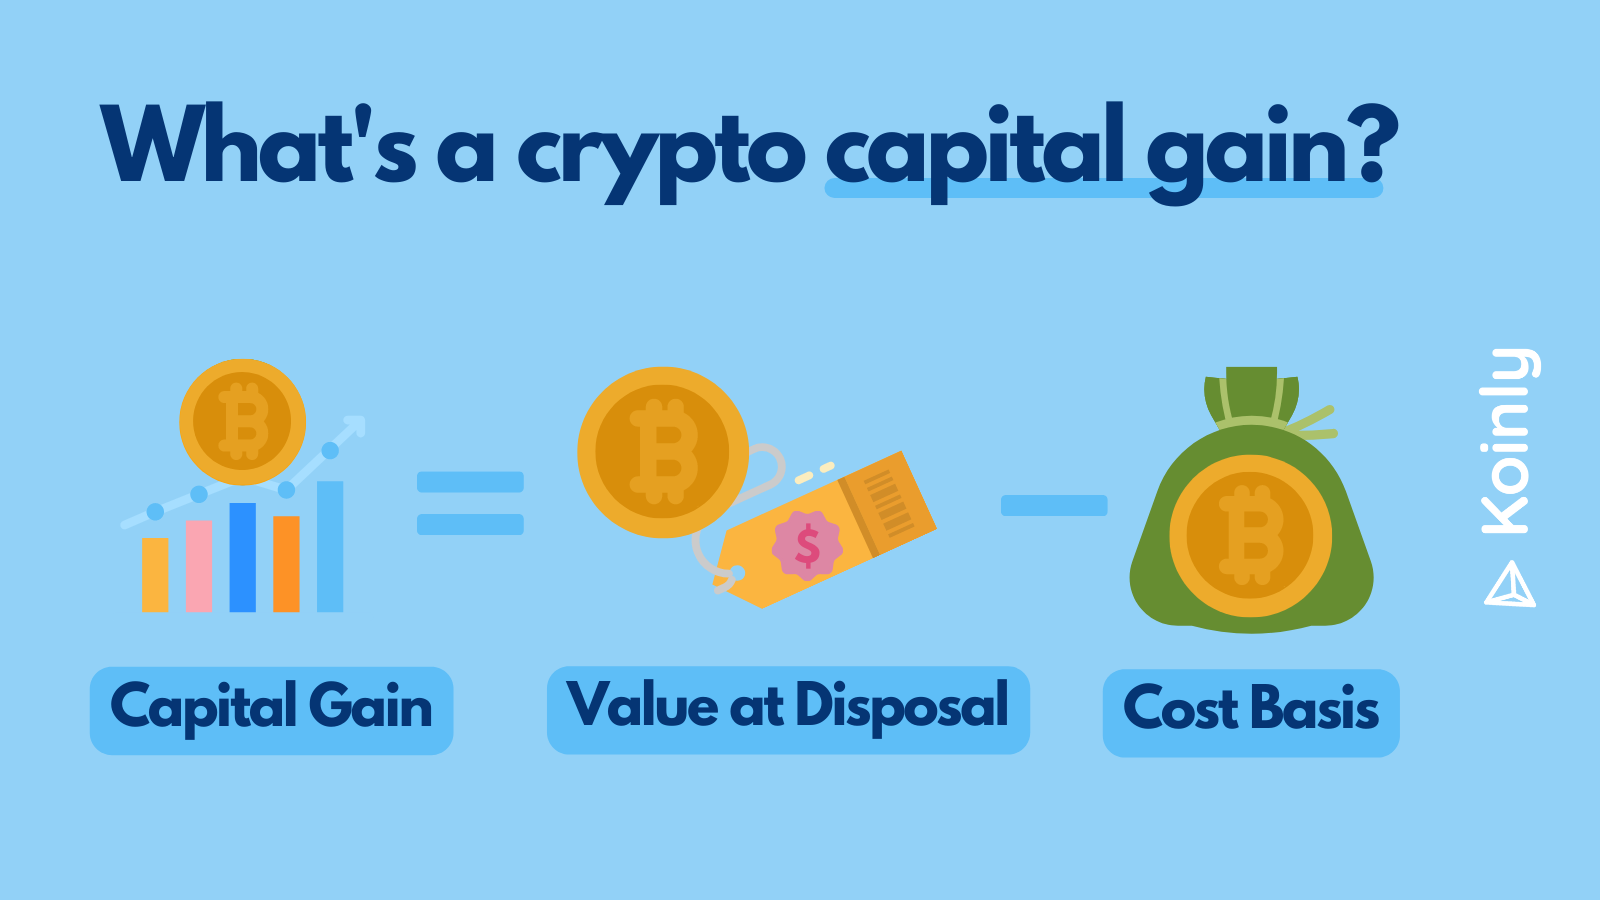 How to calculate a crypto capital gain or loss